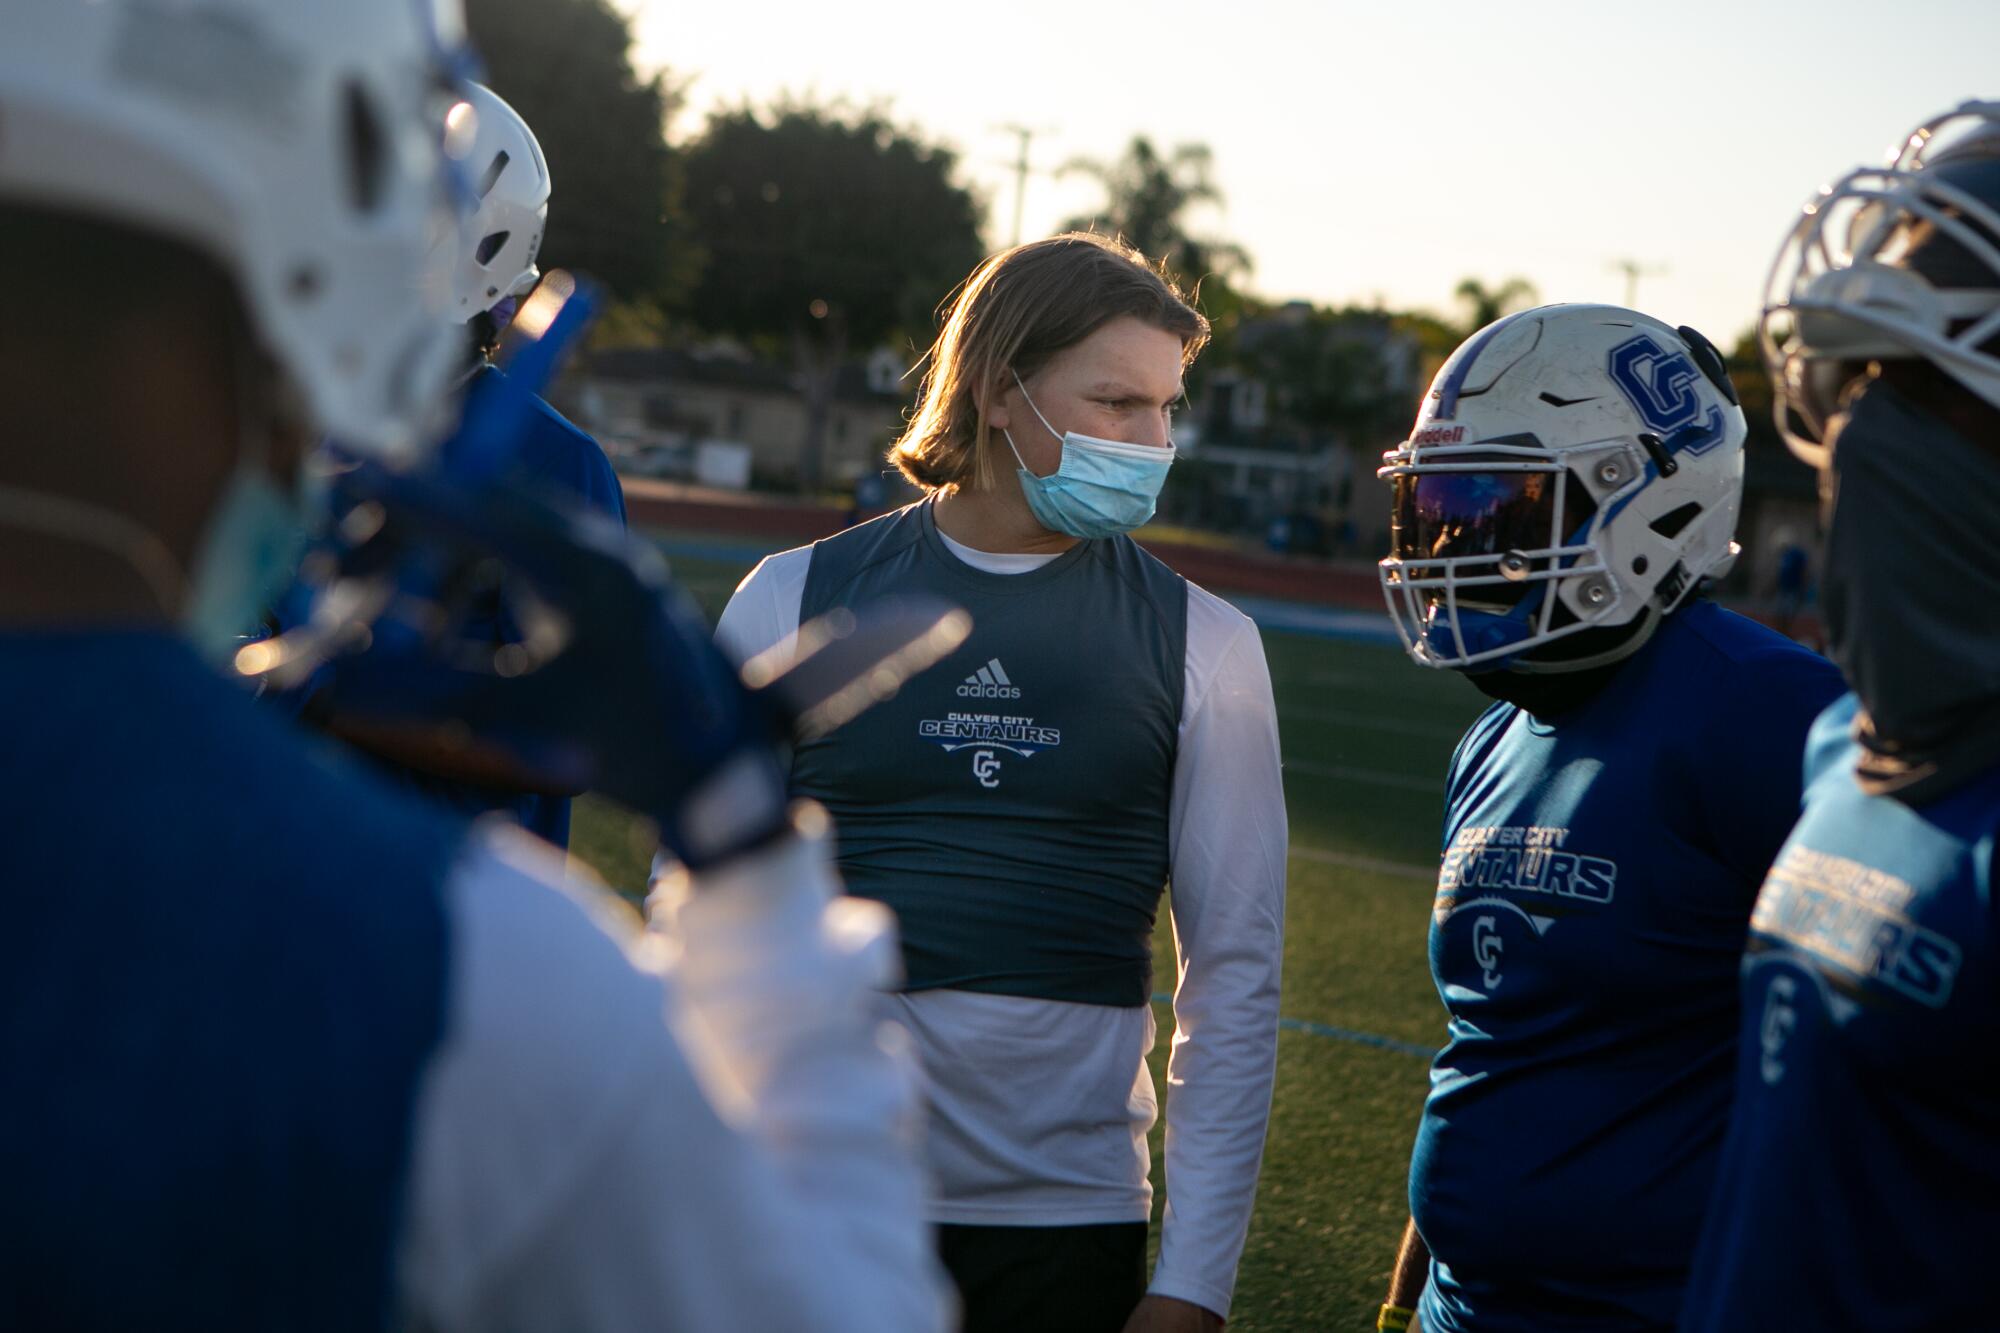 Culver City quarterback Zevi Eckhaus and other players are masked up during the first official football practice.